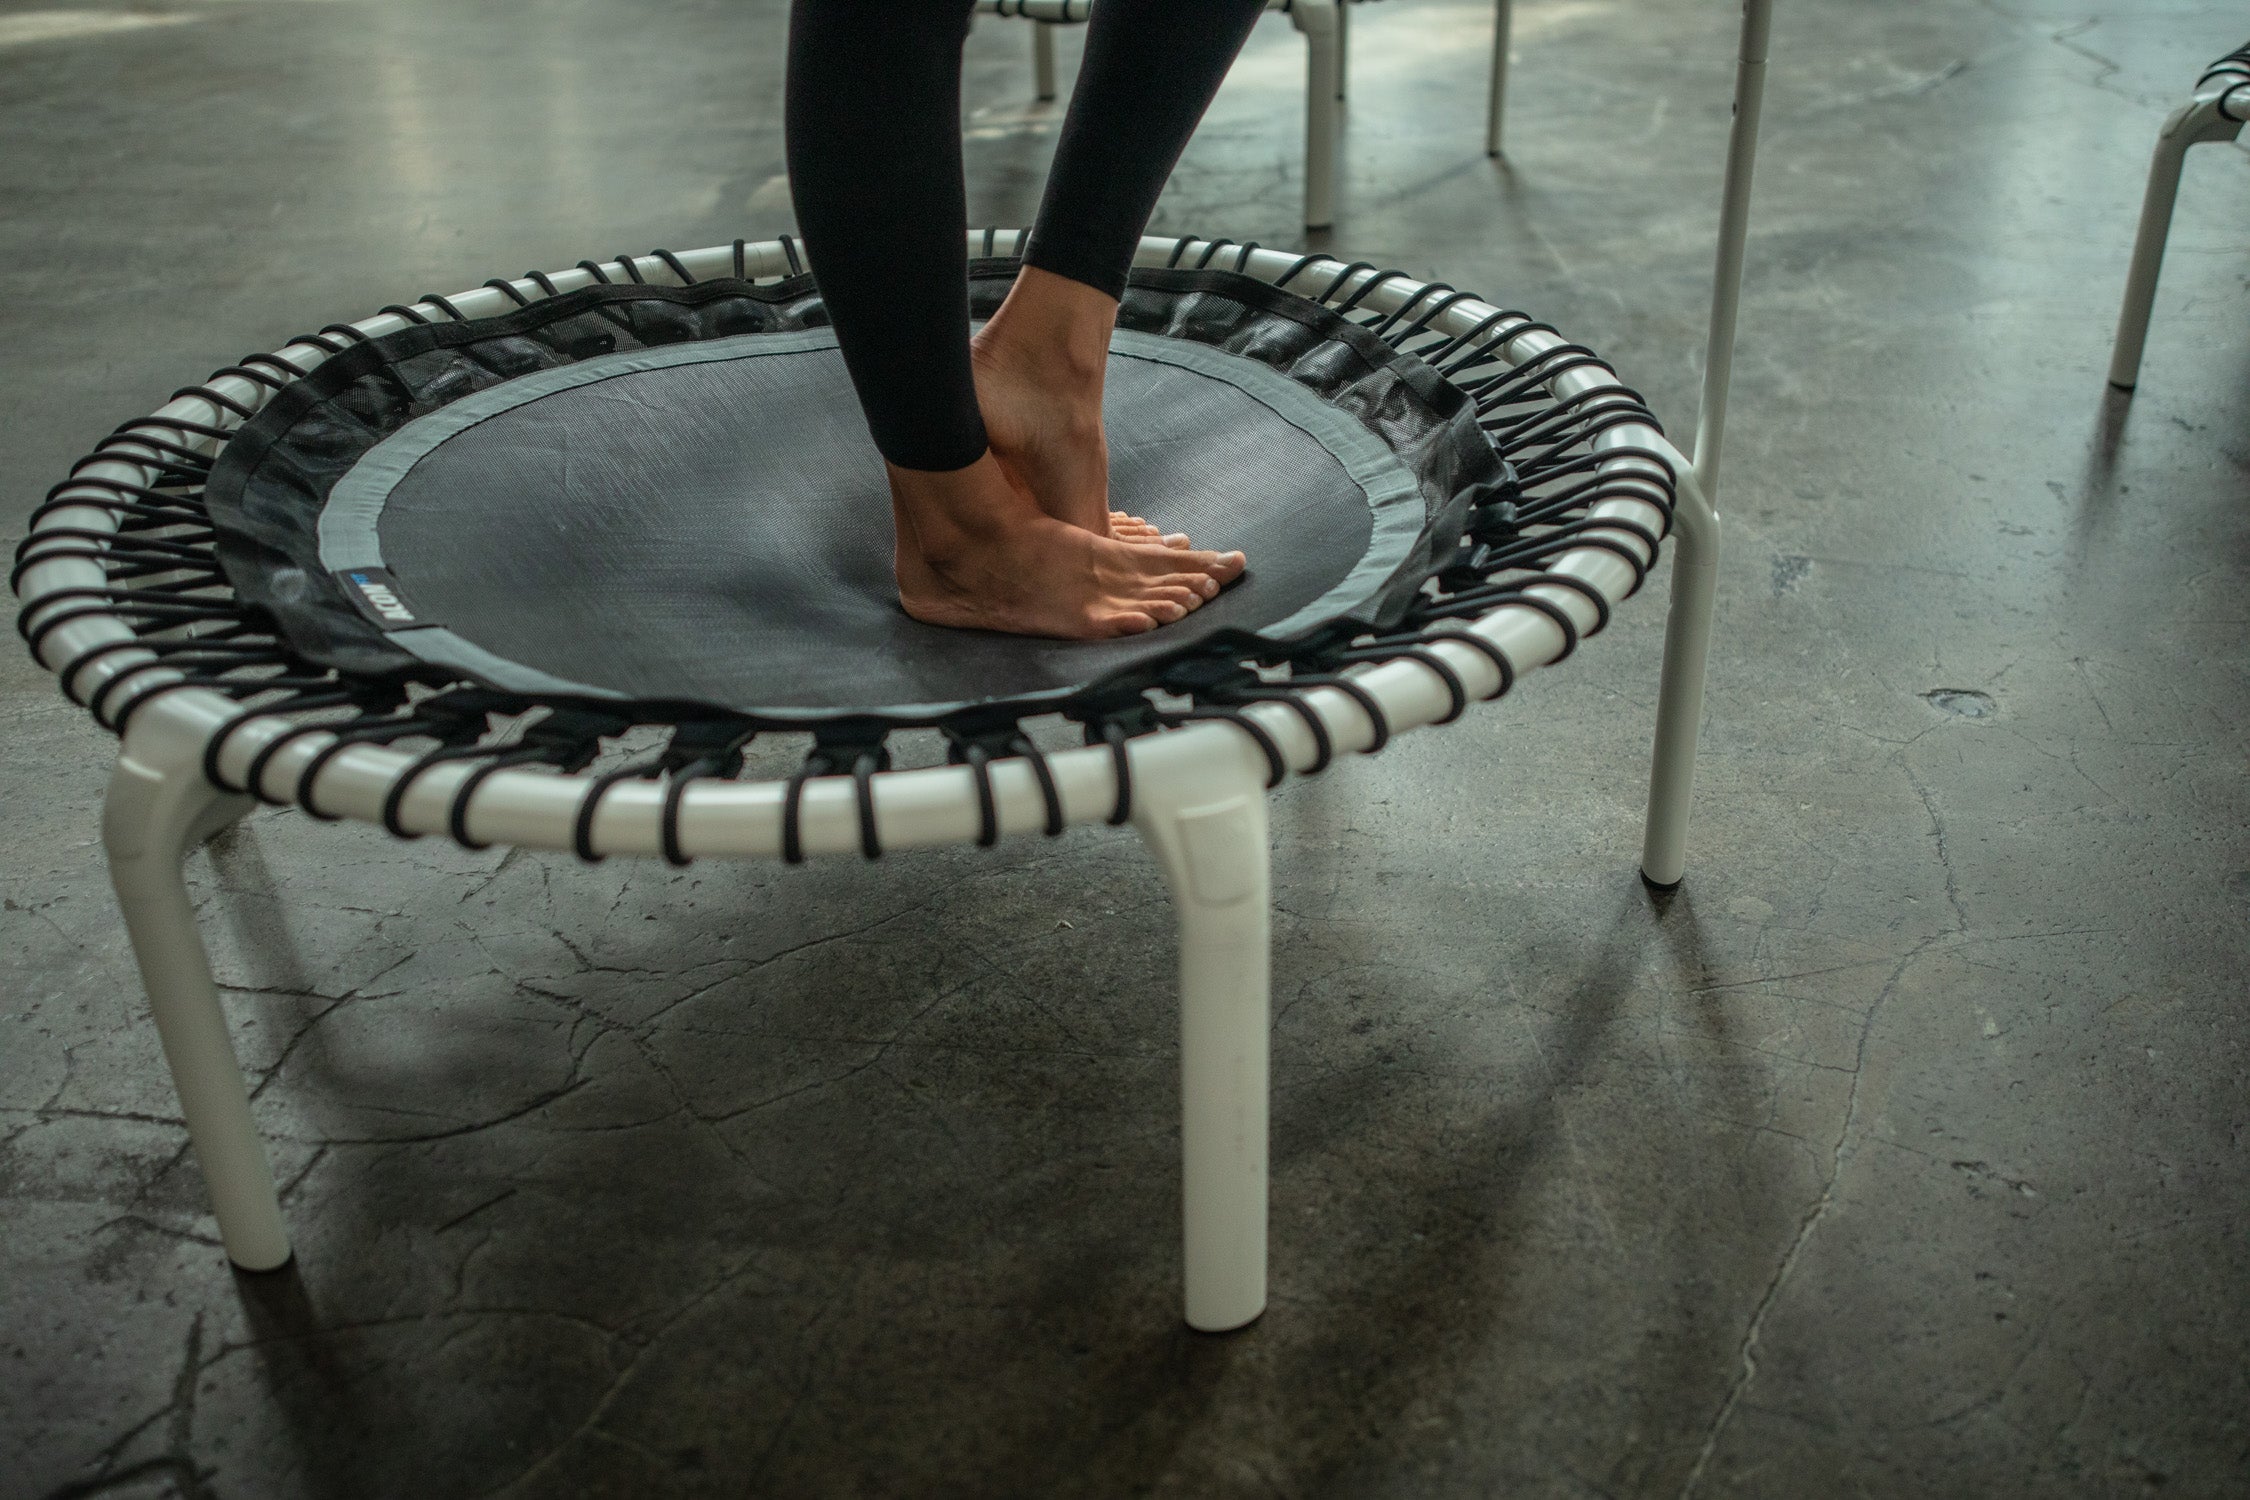 A woman standing on a rebounder trampoline. Closeup image